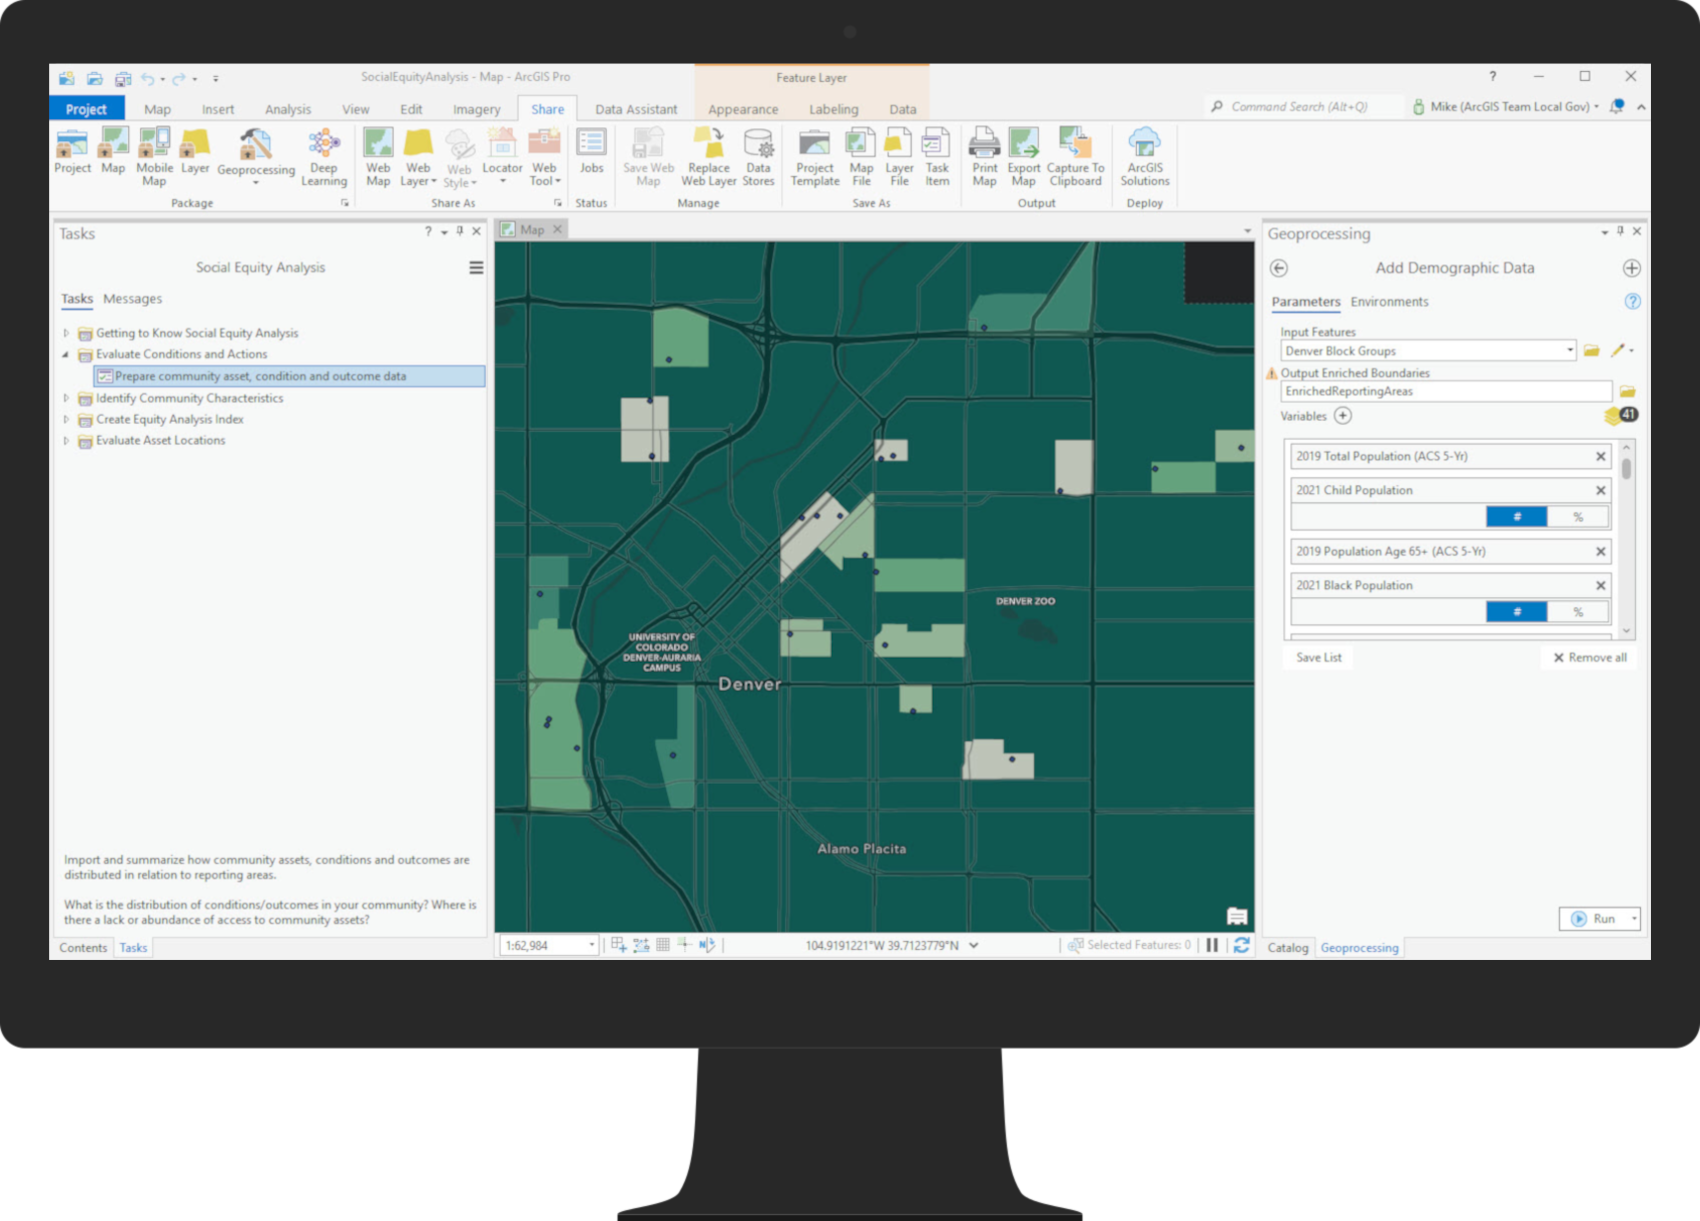 Community Condition Rate map in ArcGIS Pro